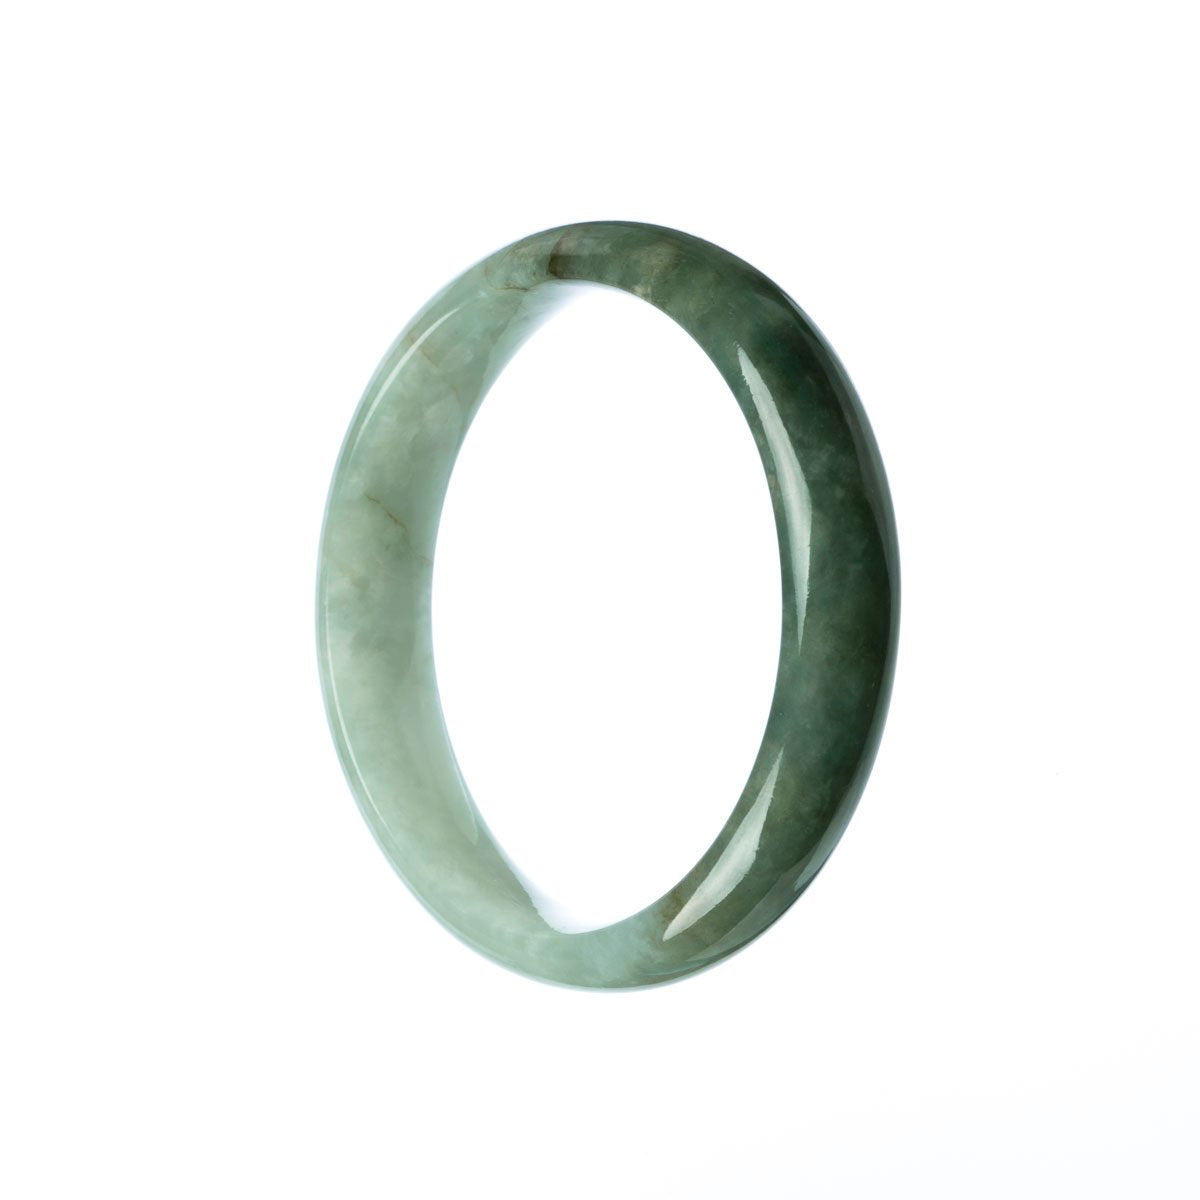 A half-moon shaped green jade bangle with a smooth, polished surface. A beautiful green jade bangle with a unique half-moon shape, perfect for adding an elegant touch to any outfit.